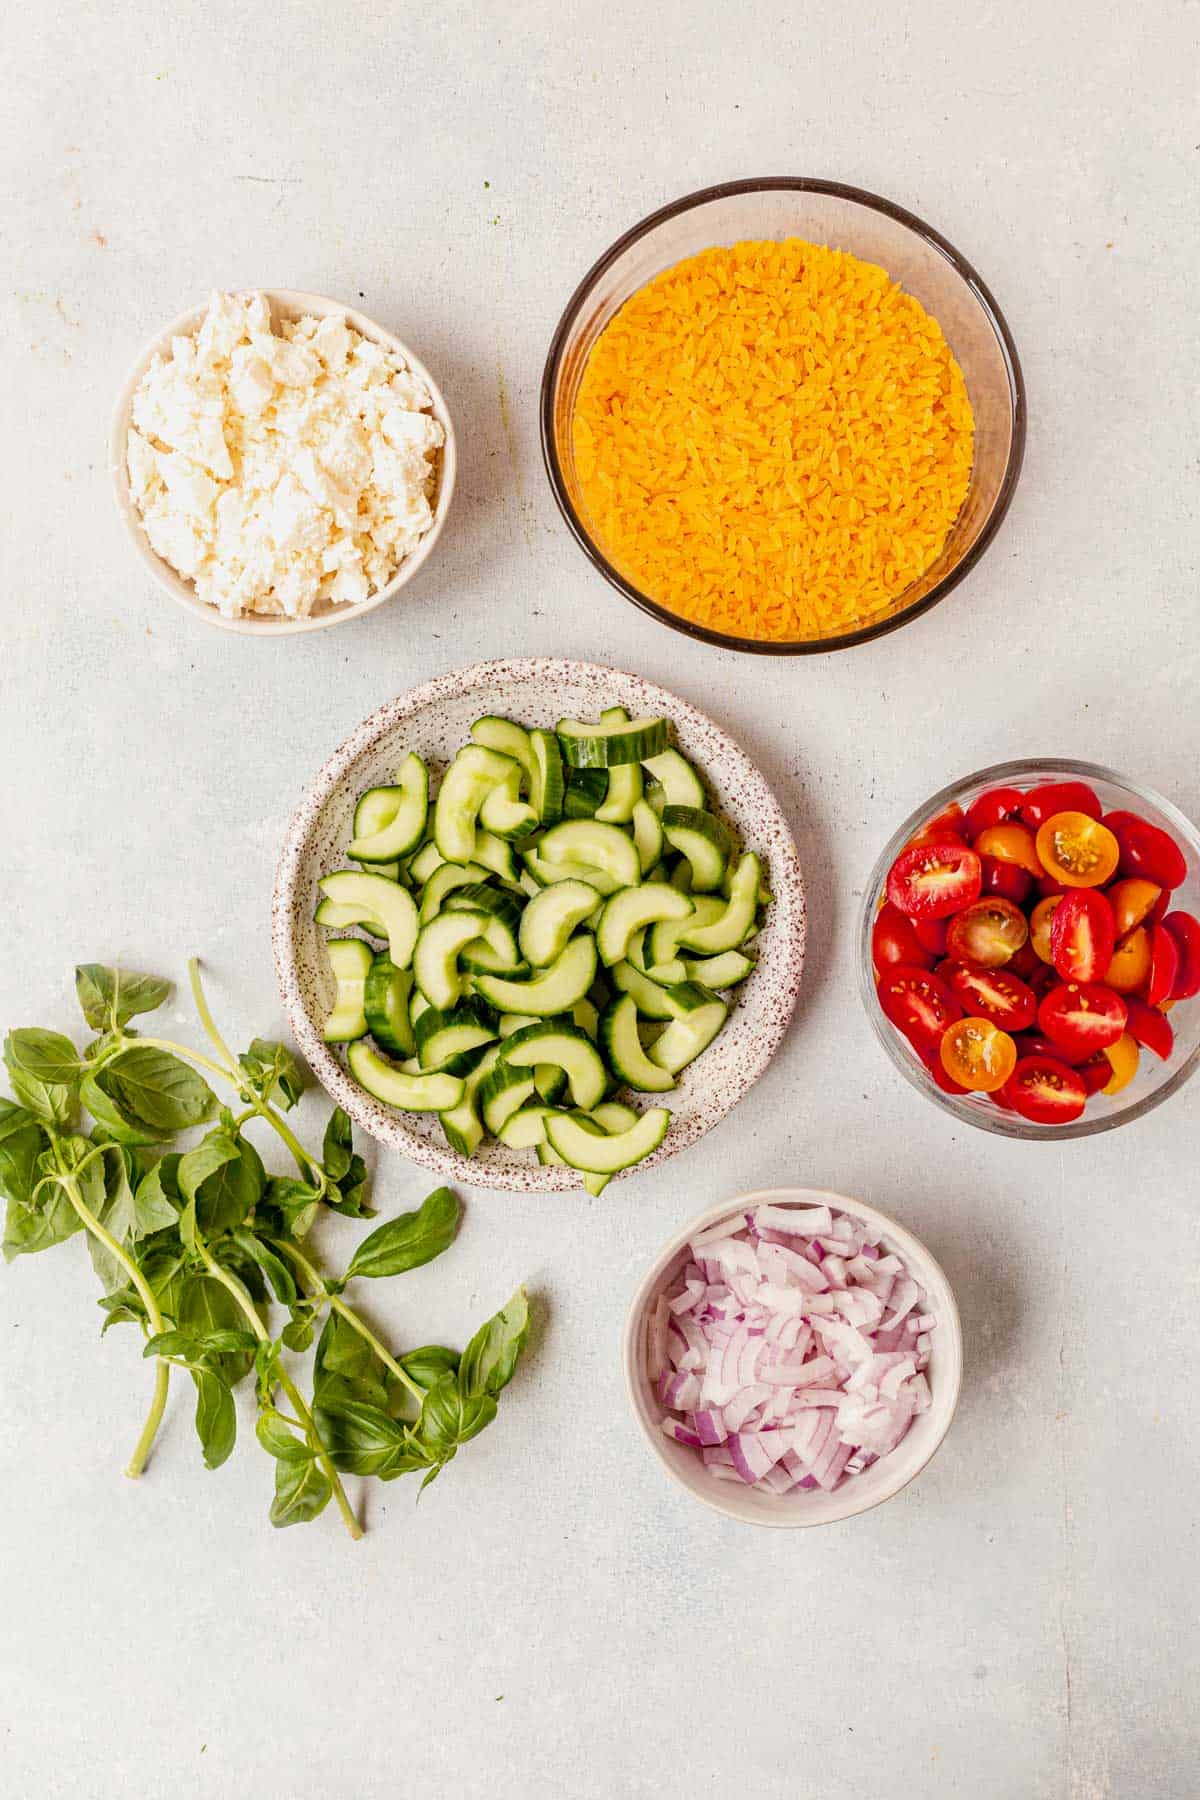 ingredients for lemon orzo pasta salad in separate bowls on a counter